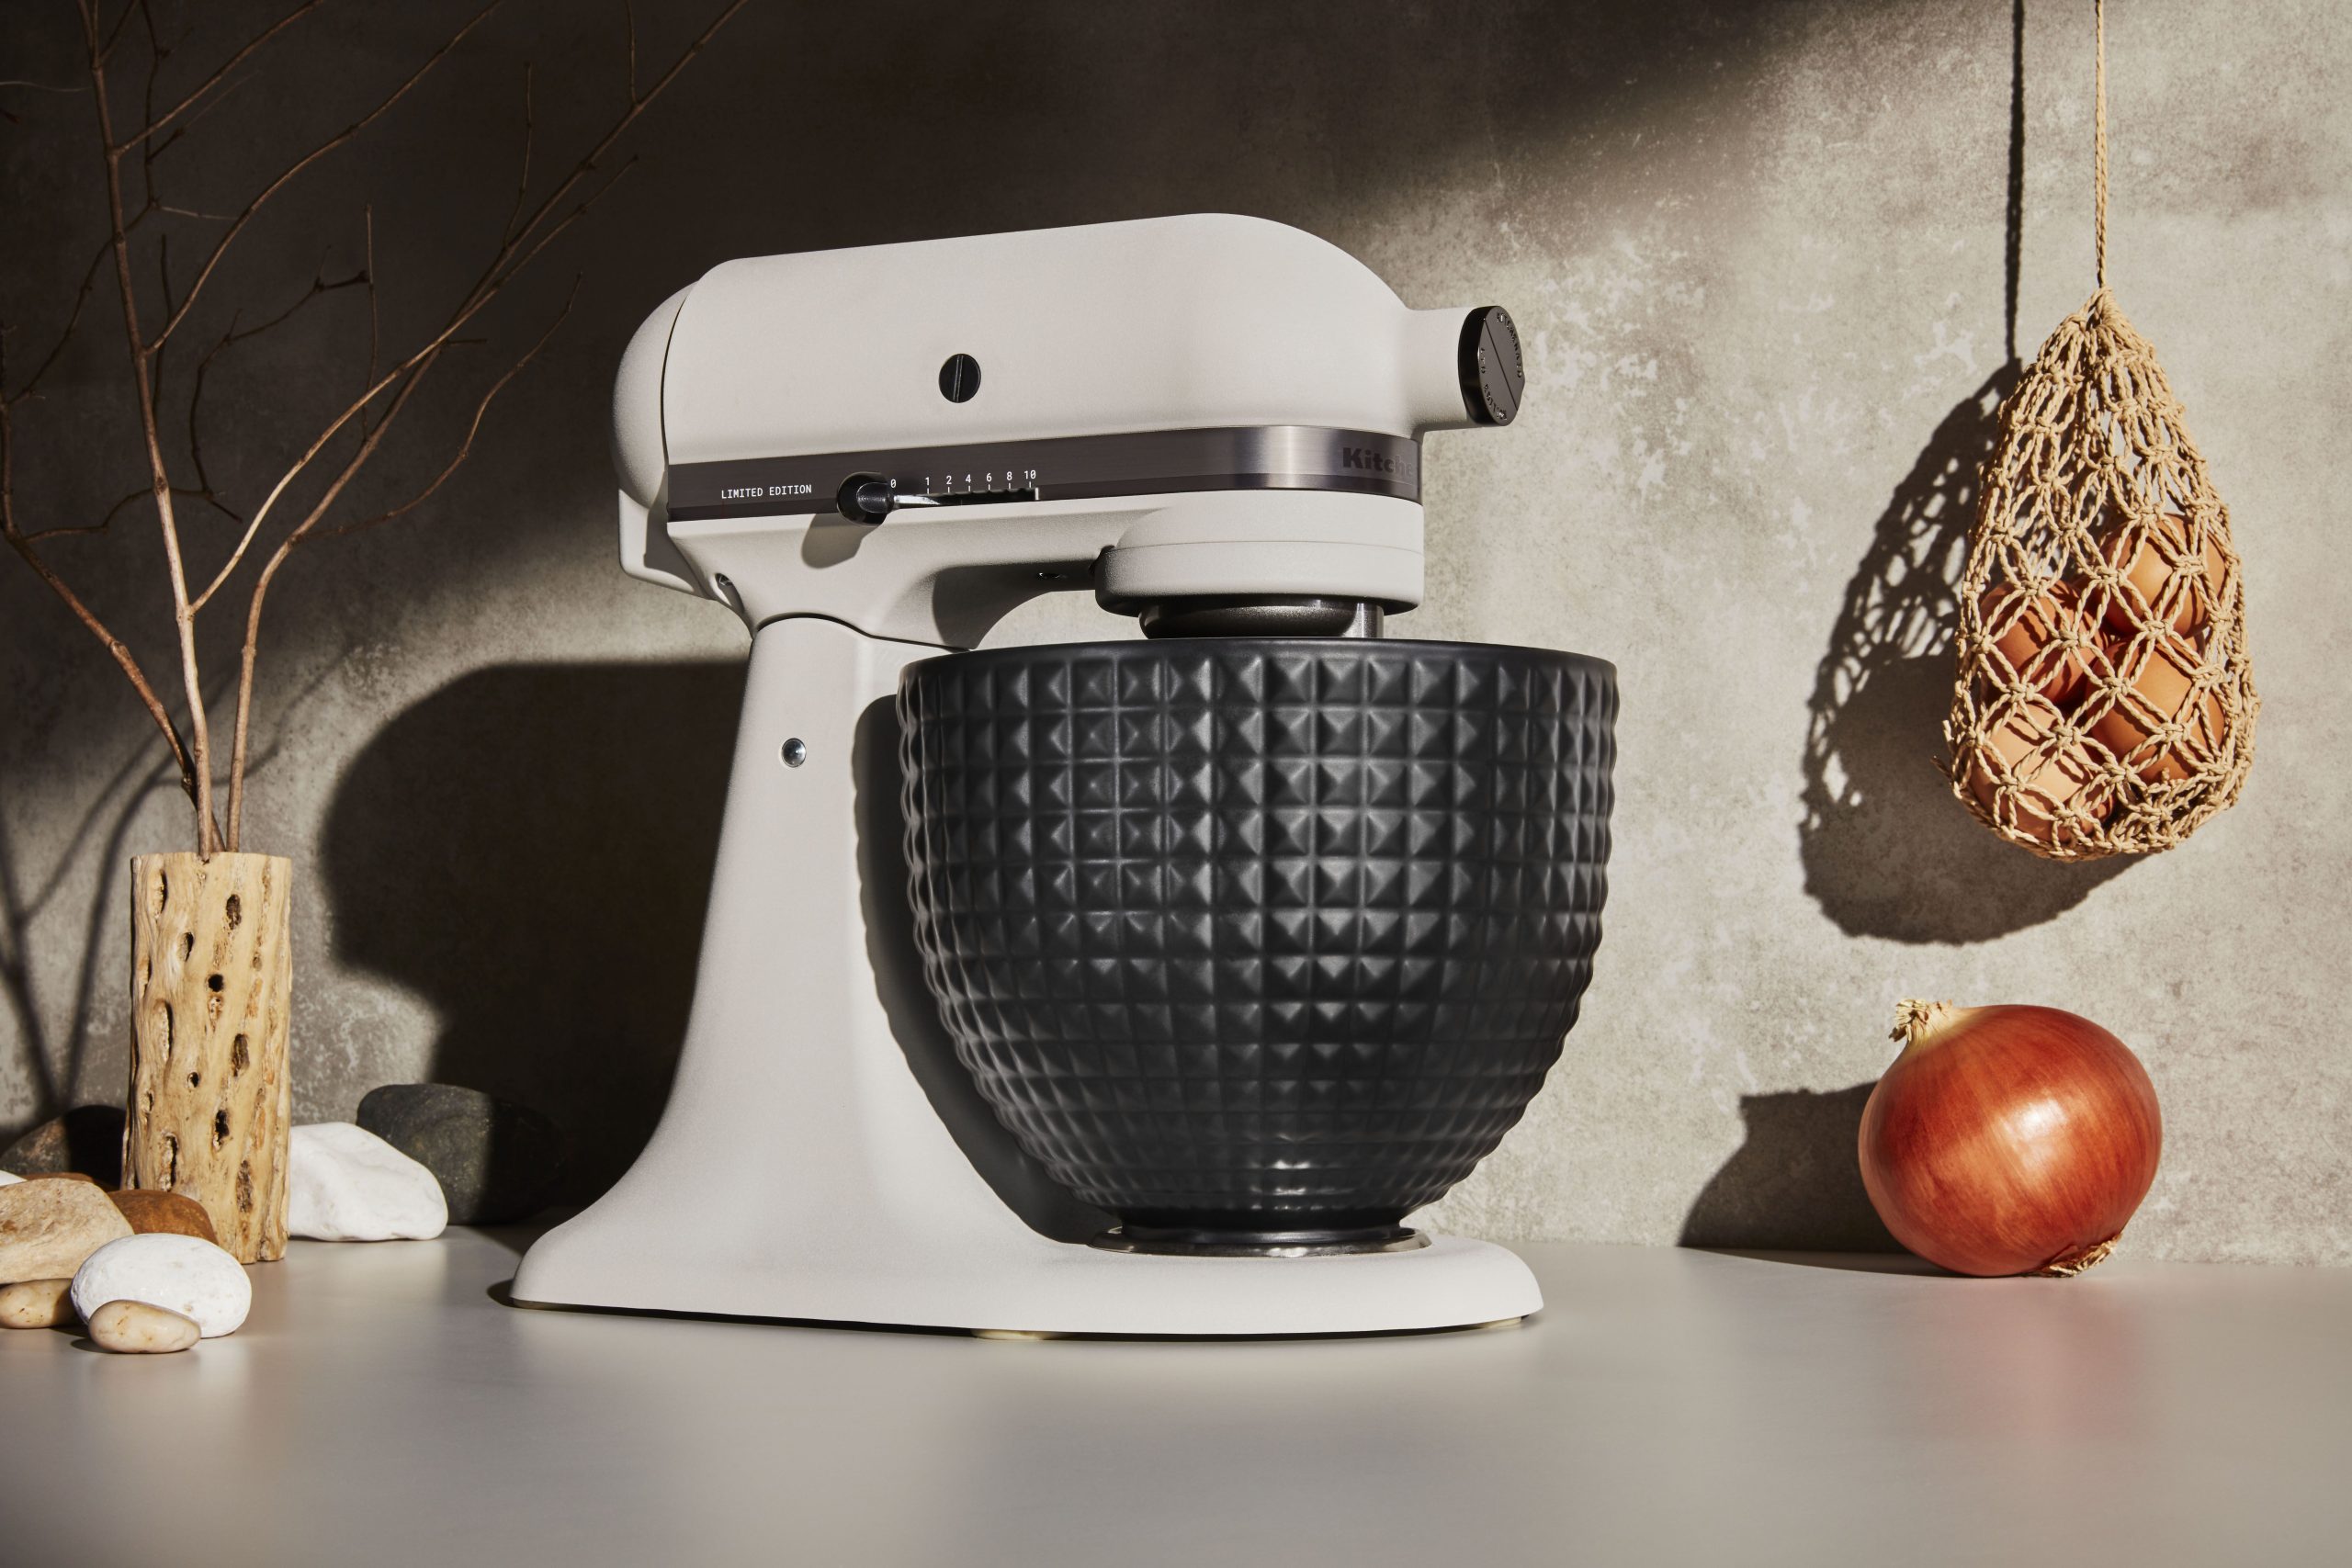 Kitchenaid's New Color Is Here!